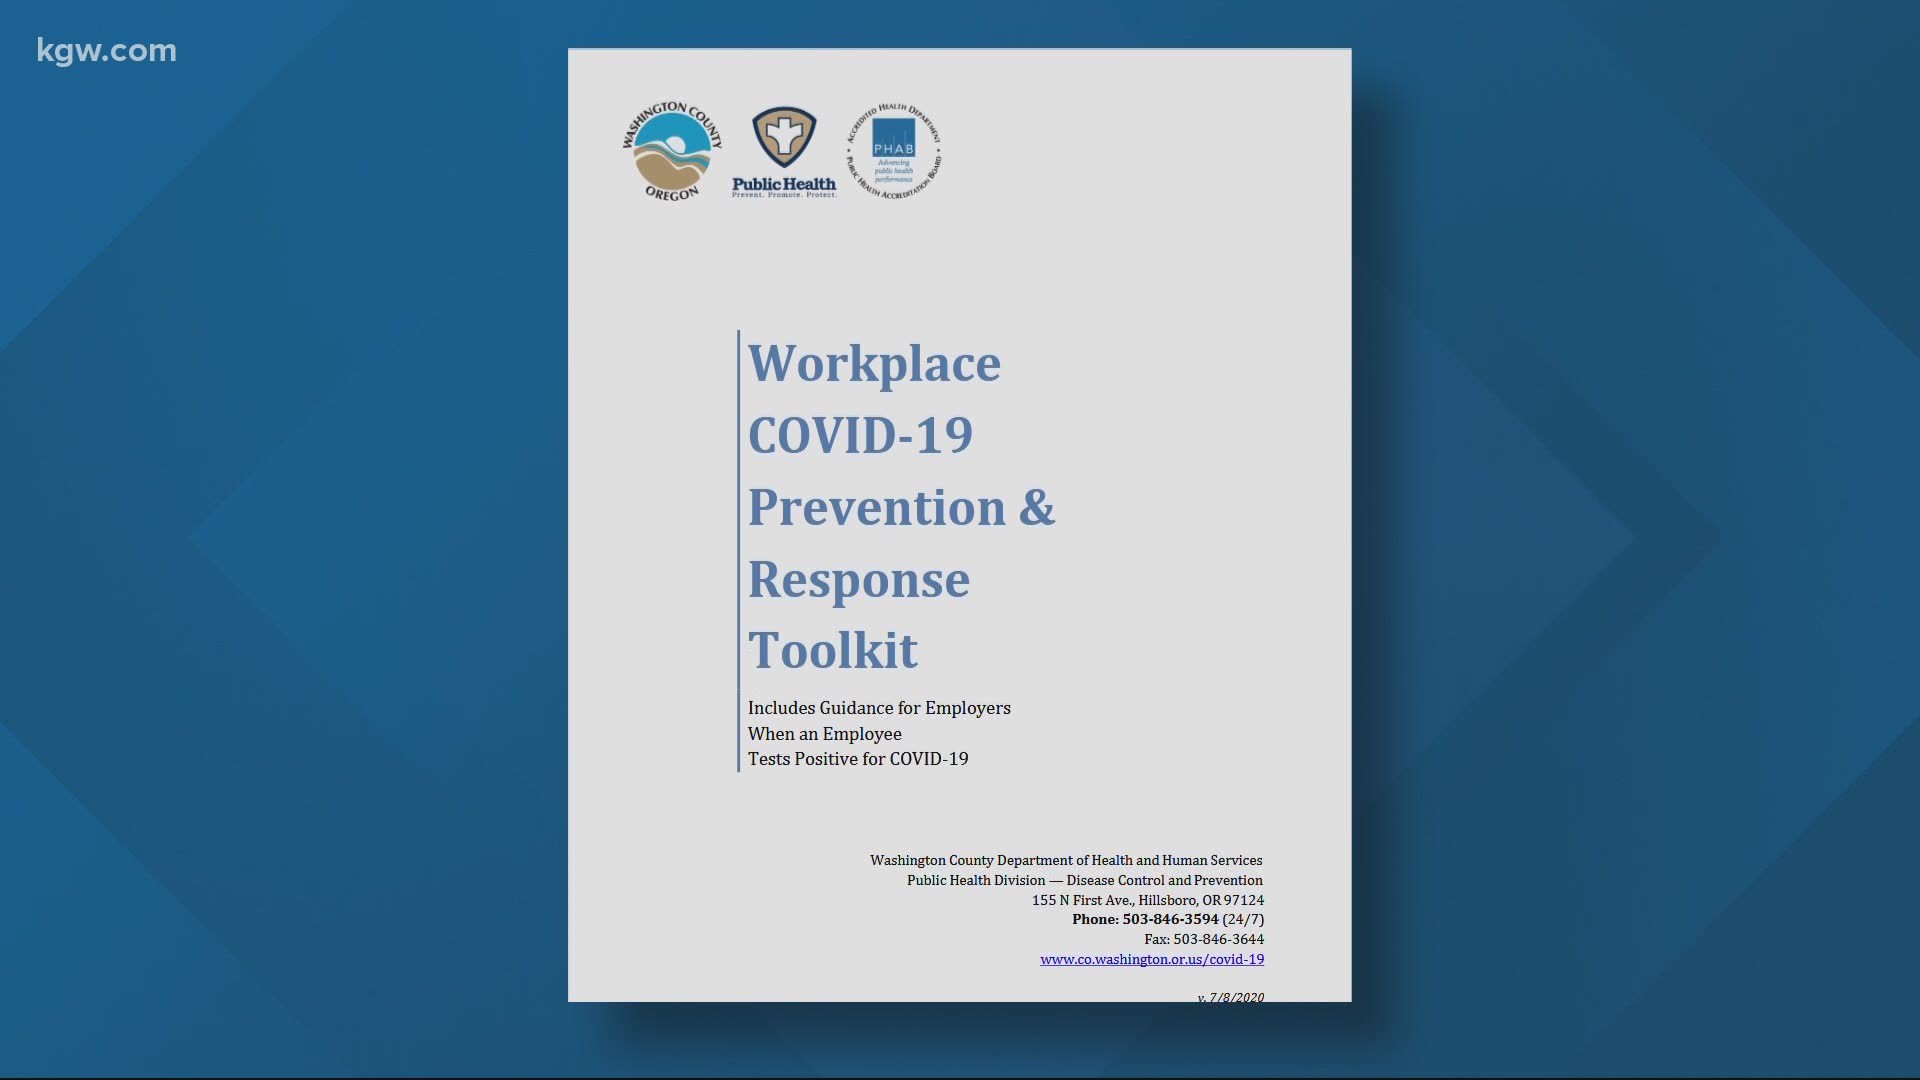 The goal is to help employers comply with safety guidelines and avoid a coronavirus outbreak. And they've got a “tool kit” to do it.